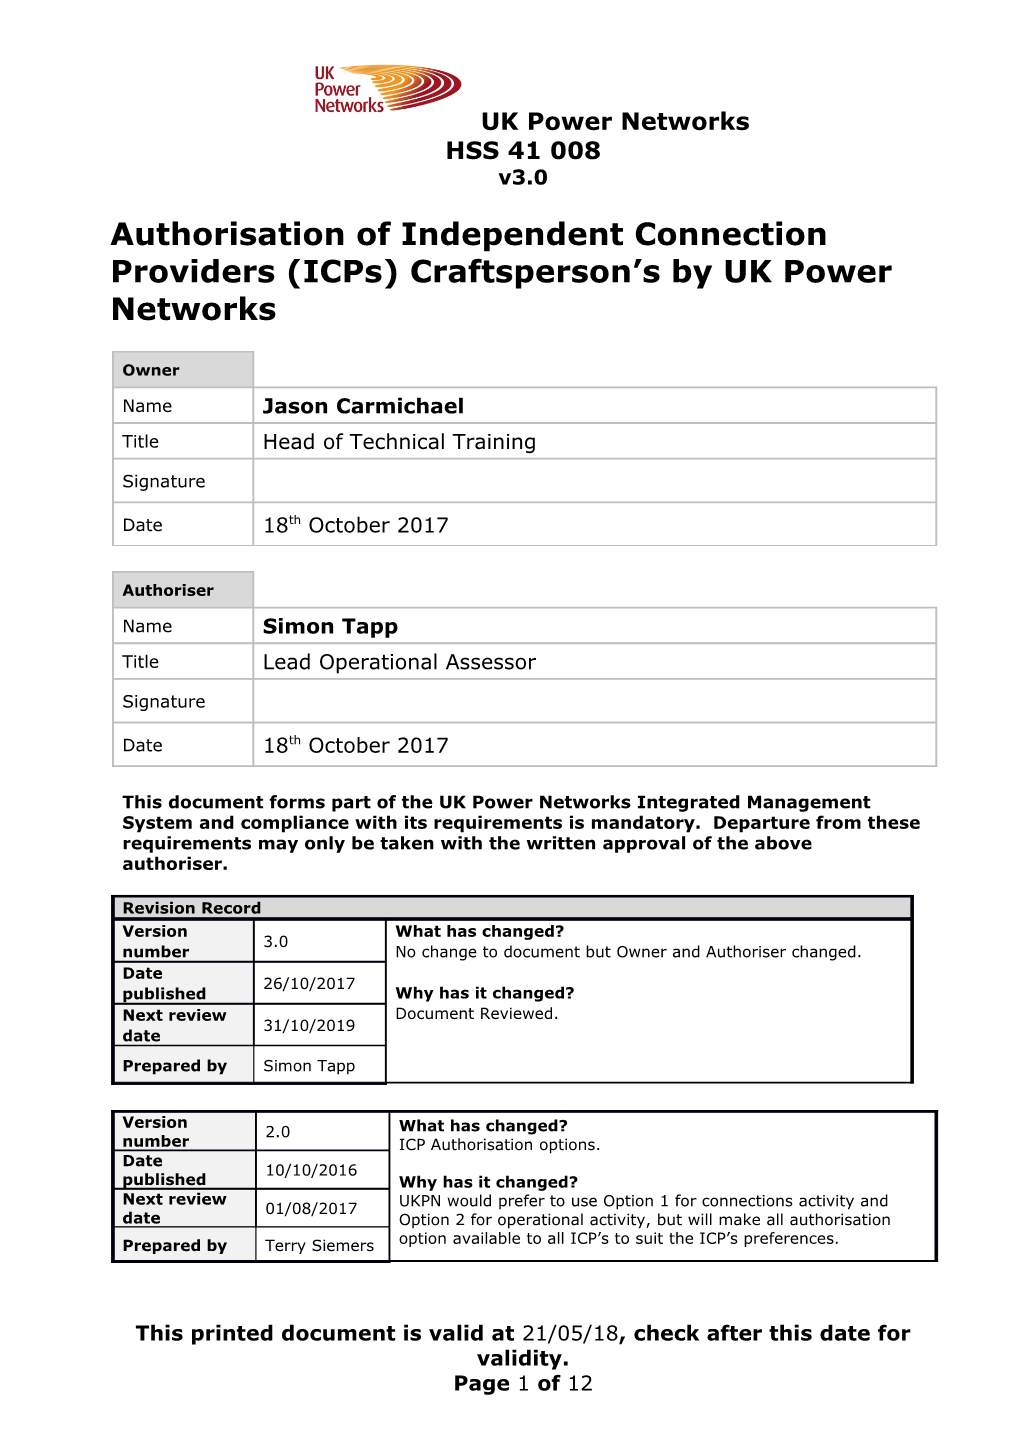 HSS 41 008 Authorisation of Independent Connection Providers (Icps) Craftsperson S by UK